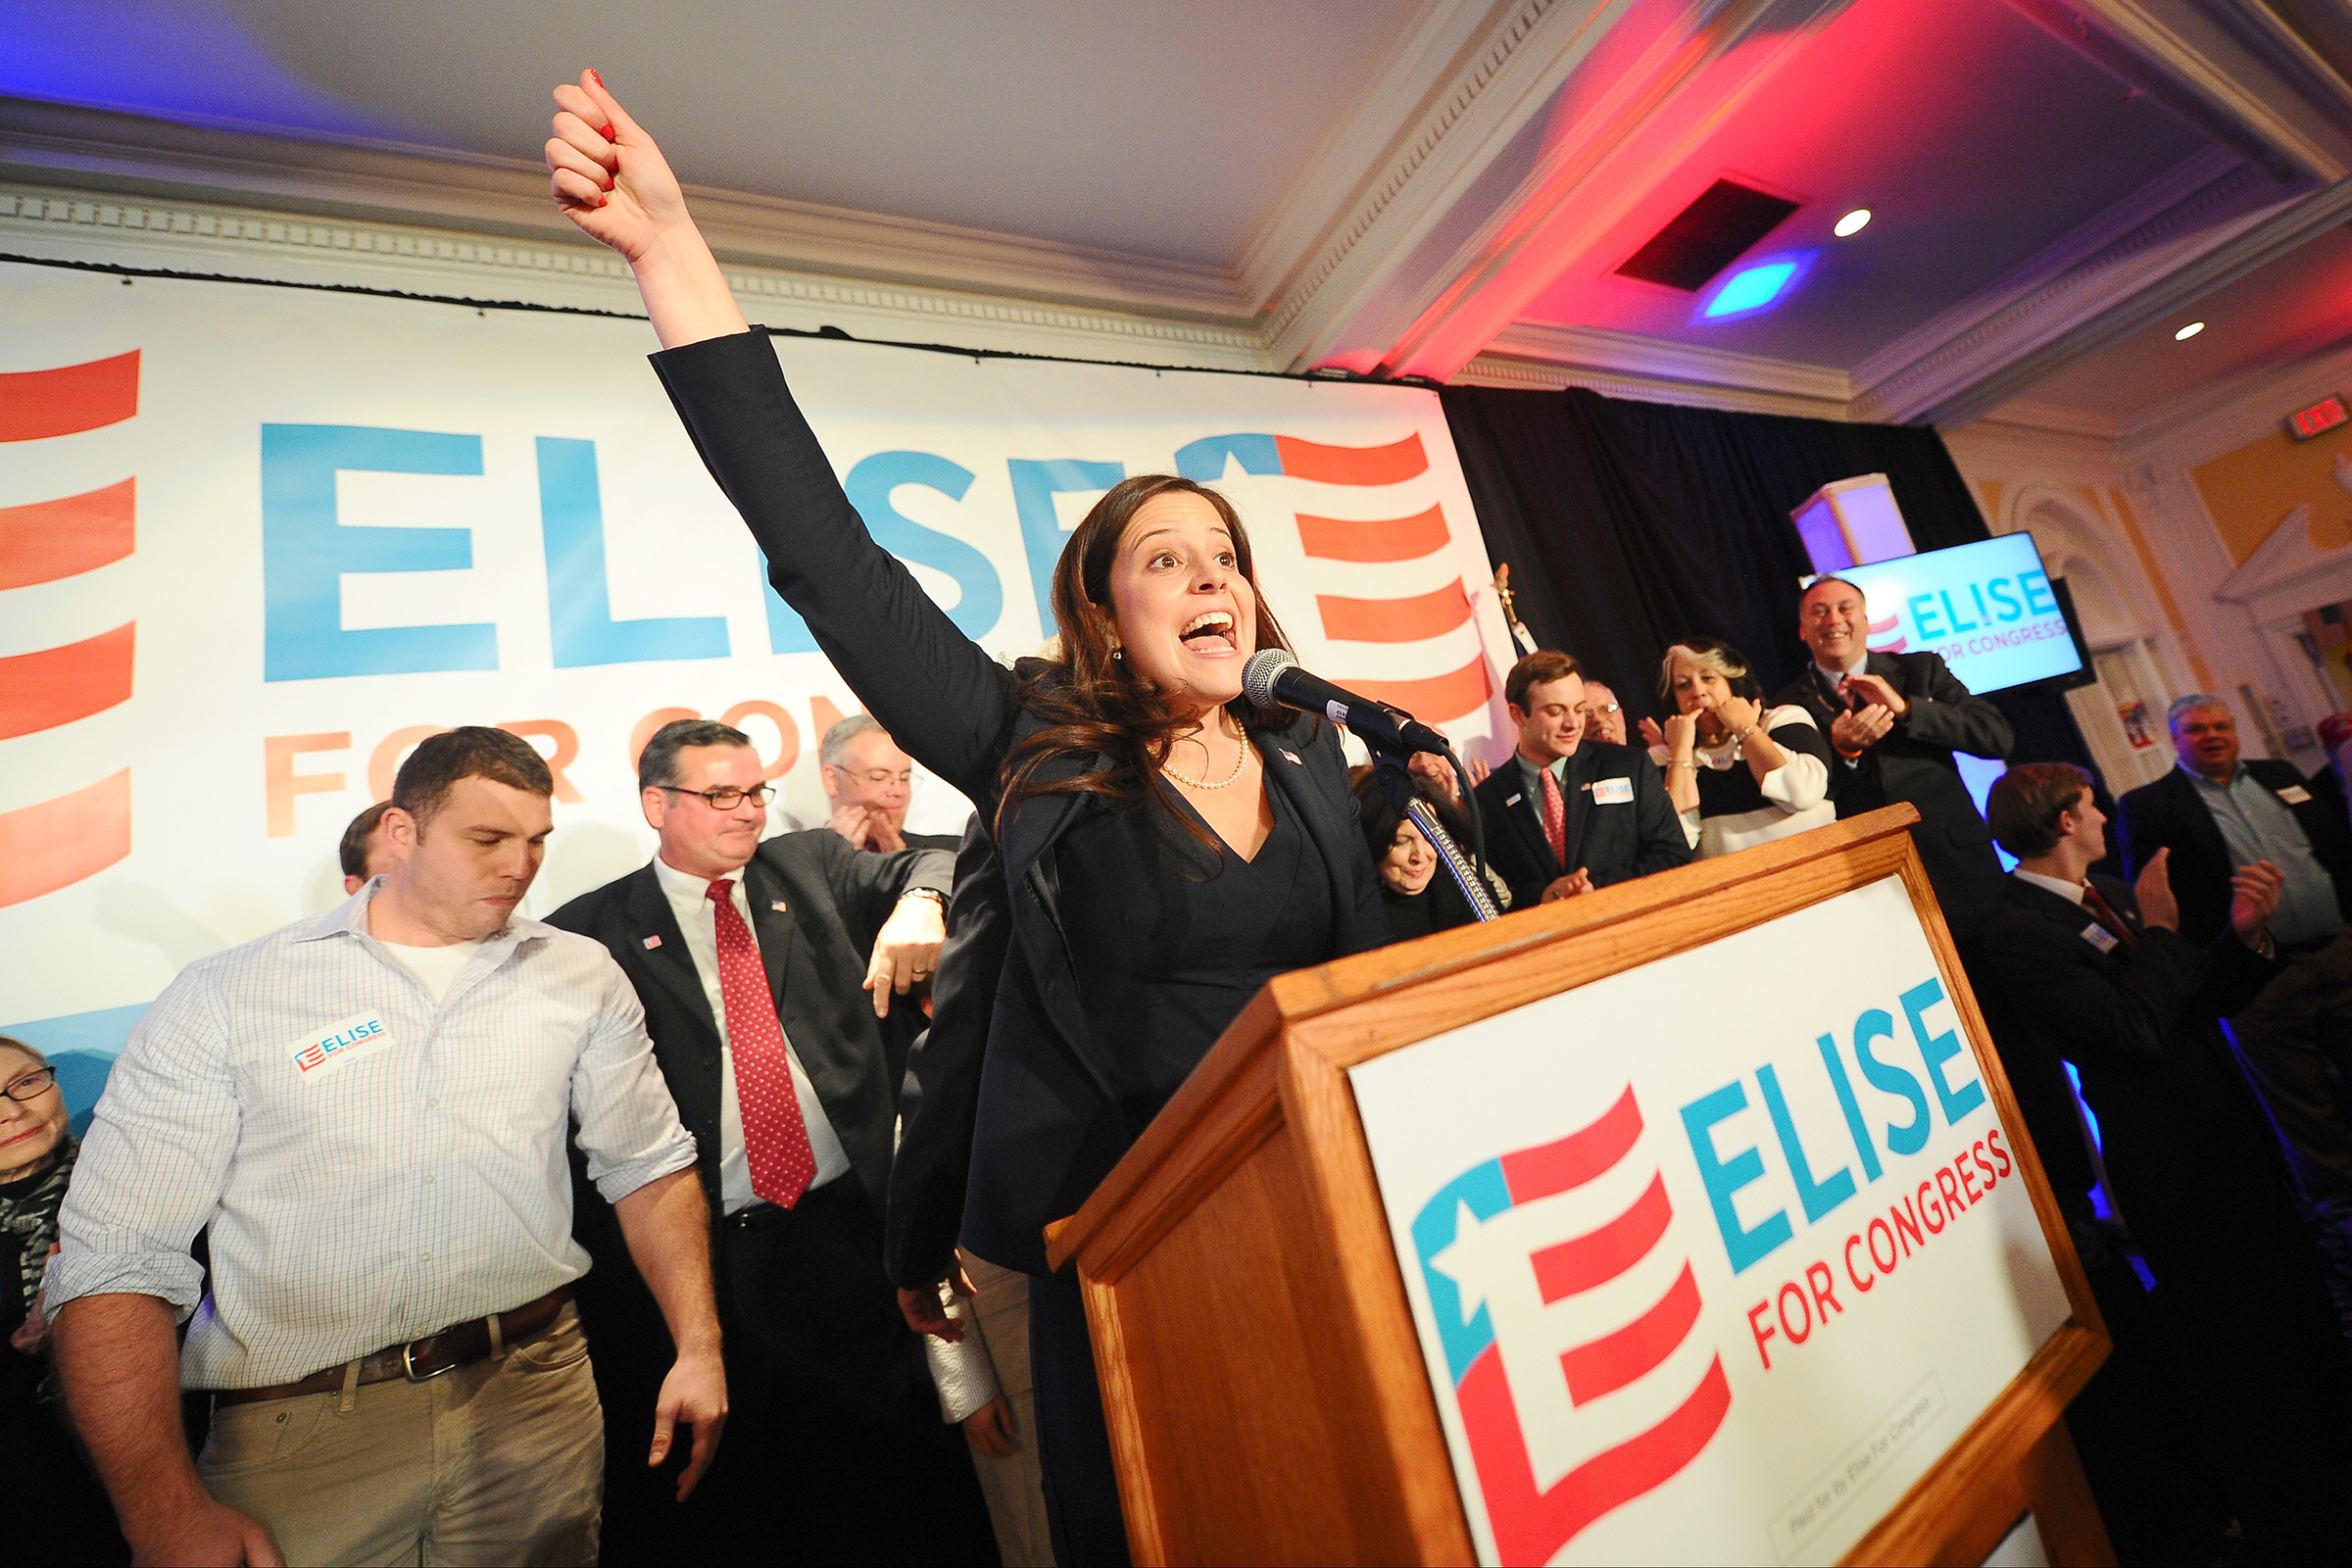 Elise Stefanik celebrates her win in the 21st Congressional district on election night at the Queensbury Hotel in Glens Falls, N.Y., on Tuesday, Nov. 4, 2014.